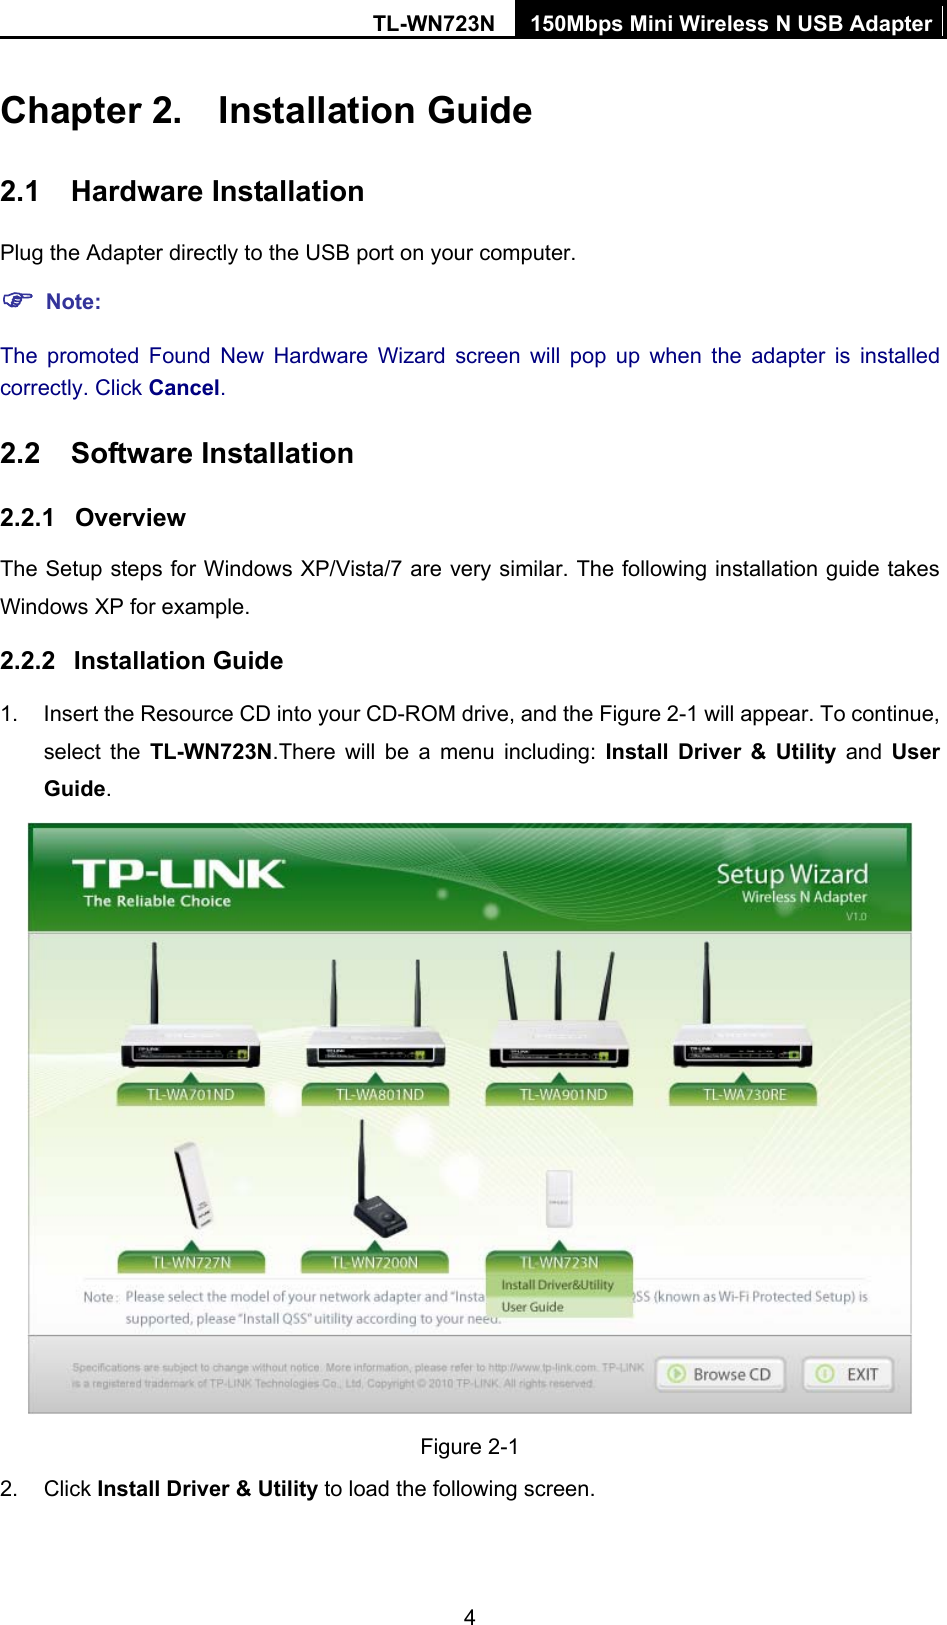 TL-WN723N  150Mbps Mini Wireless N USB Adapter 4 Chapter 2.  Installation Guide 2.1  Hardware Installation Plug the Adapter directly to the USB port on your computer. ) Note: The promoted Found New Hardware Wizard screen will pop up when the adapter is installed correctly. Click Cancel. 2.2  Software Installation 2.2.1  Overview The Setup steps for Windows XP/Vista/7 are very similar. The following installation guide takes Windows XP for example. 2.2.2  Installation Guide 1.  Insert the Resource CD into your CD-ROM drive, and the Figure 2-1 will appear. To continue, select the TL-WN723N.There will be a menu including: Install Driver &amp; Utility and User Guide.  Figure 2-1 2. Click Install Driver &amp; Utility to load the following screen. 